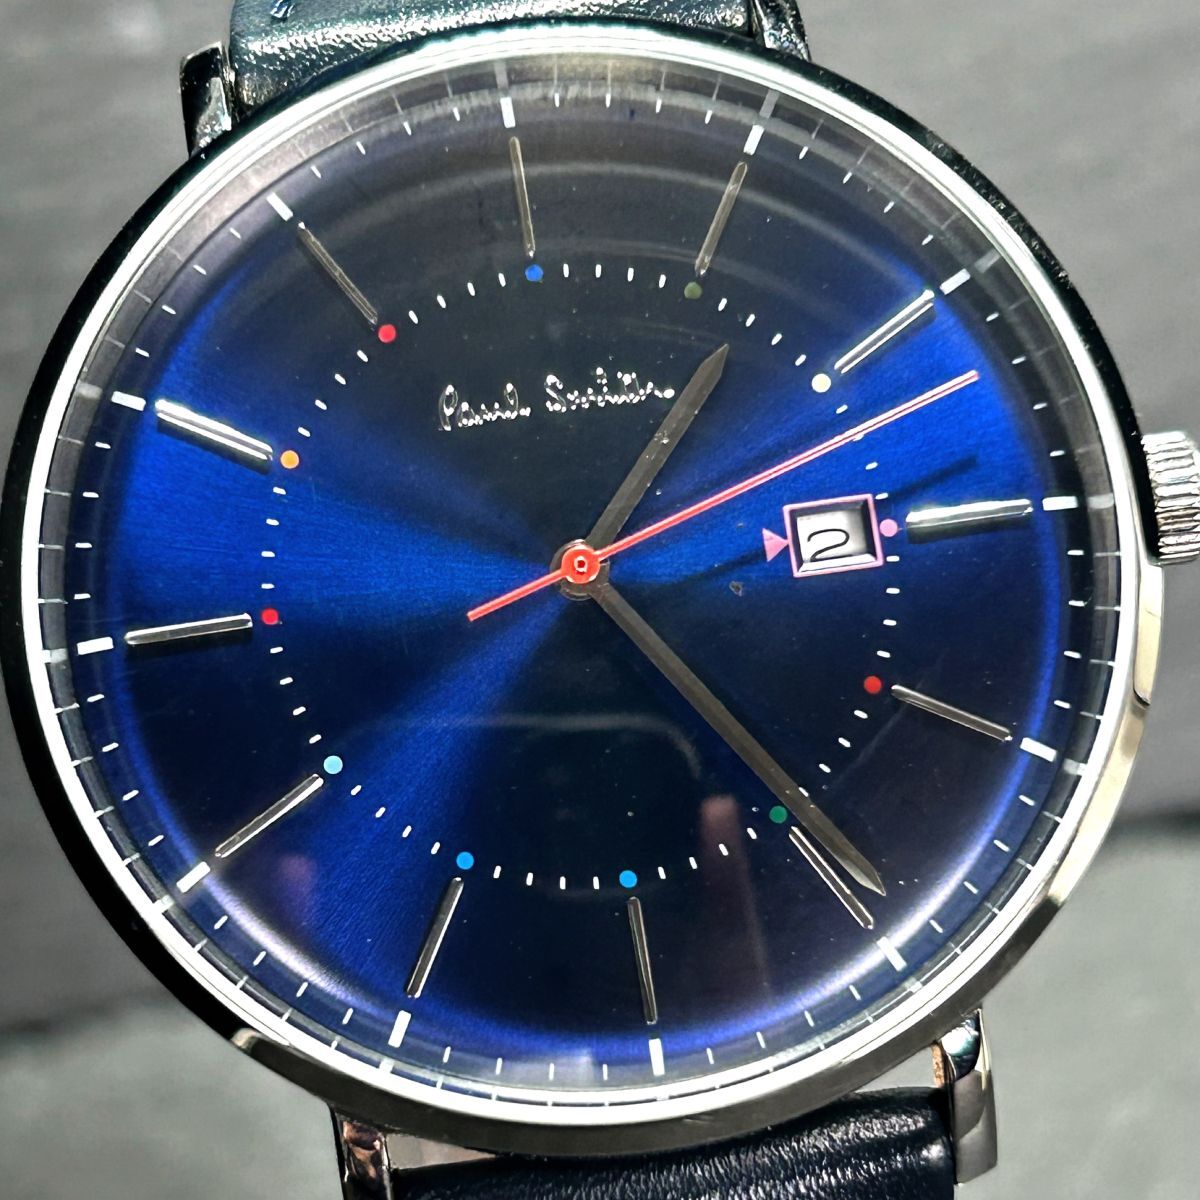  beautiful goods Paul Smith Paul Smith P10080 wristwatch quarts analogue 3 hands calendar stainless steel blue face men's new goods battery replaced 